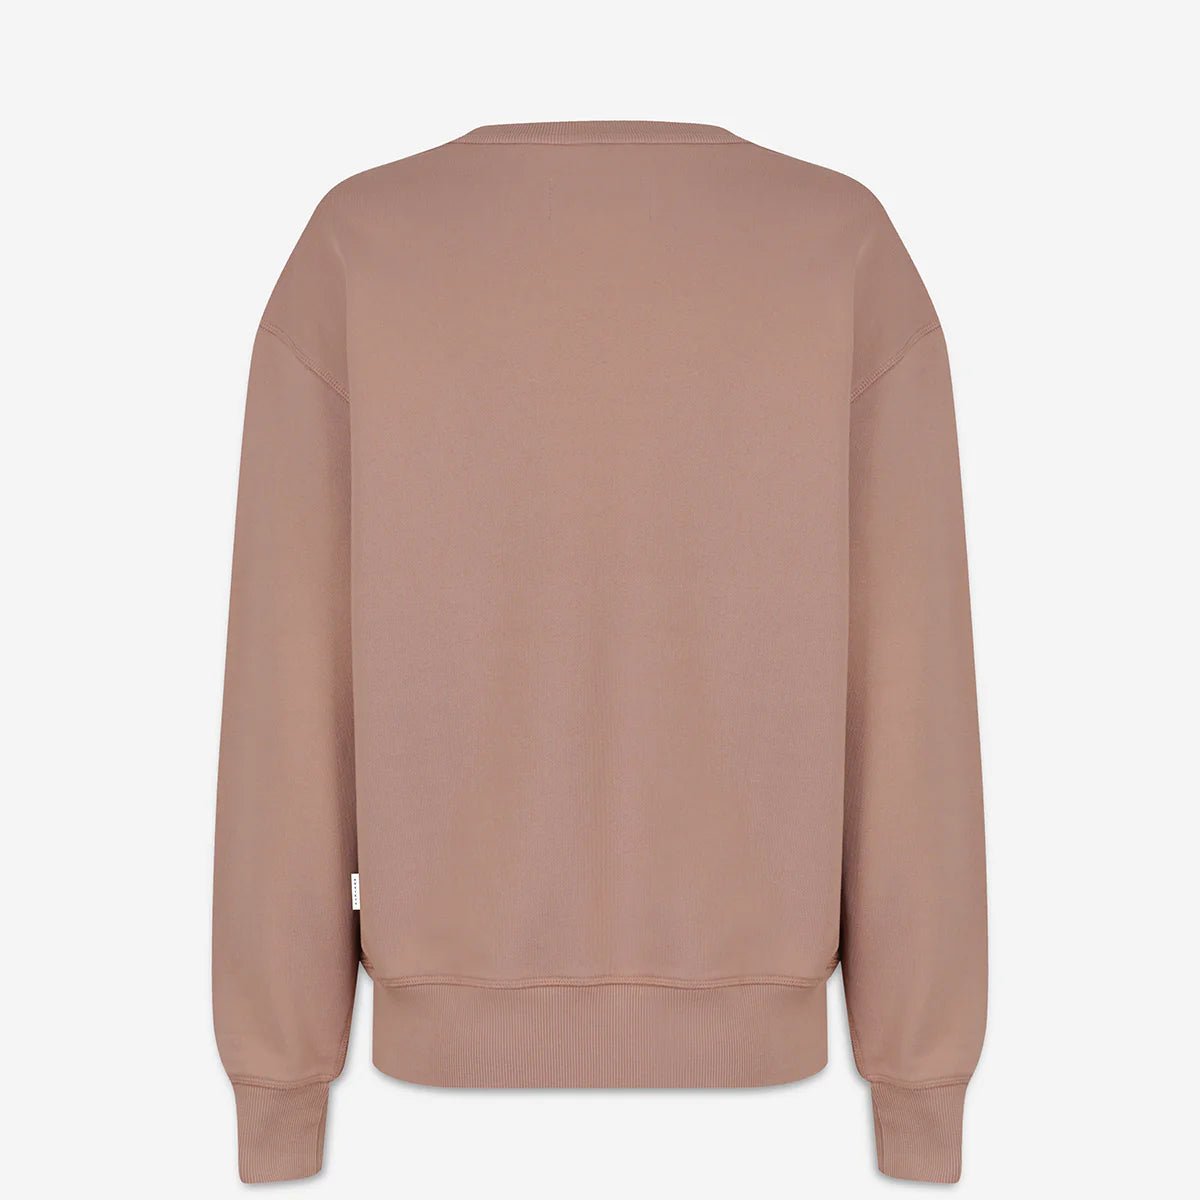 COULD BE NICE WOMEN'S CLASSIC CREW // Dusty Rose ~ Status Anxiety ~